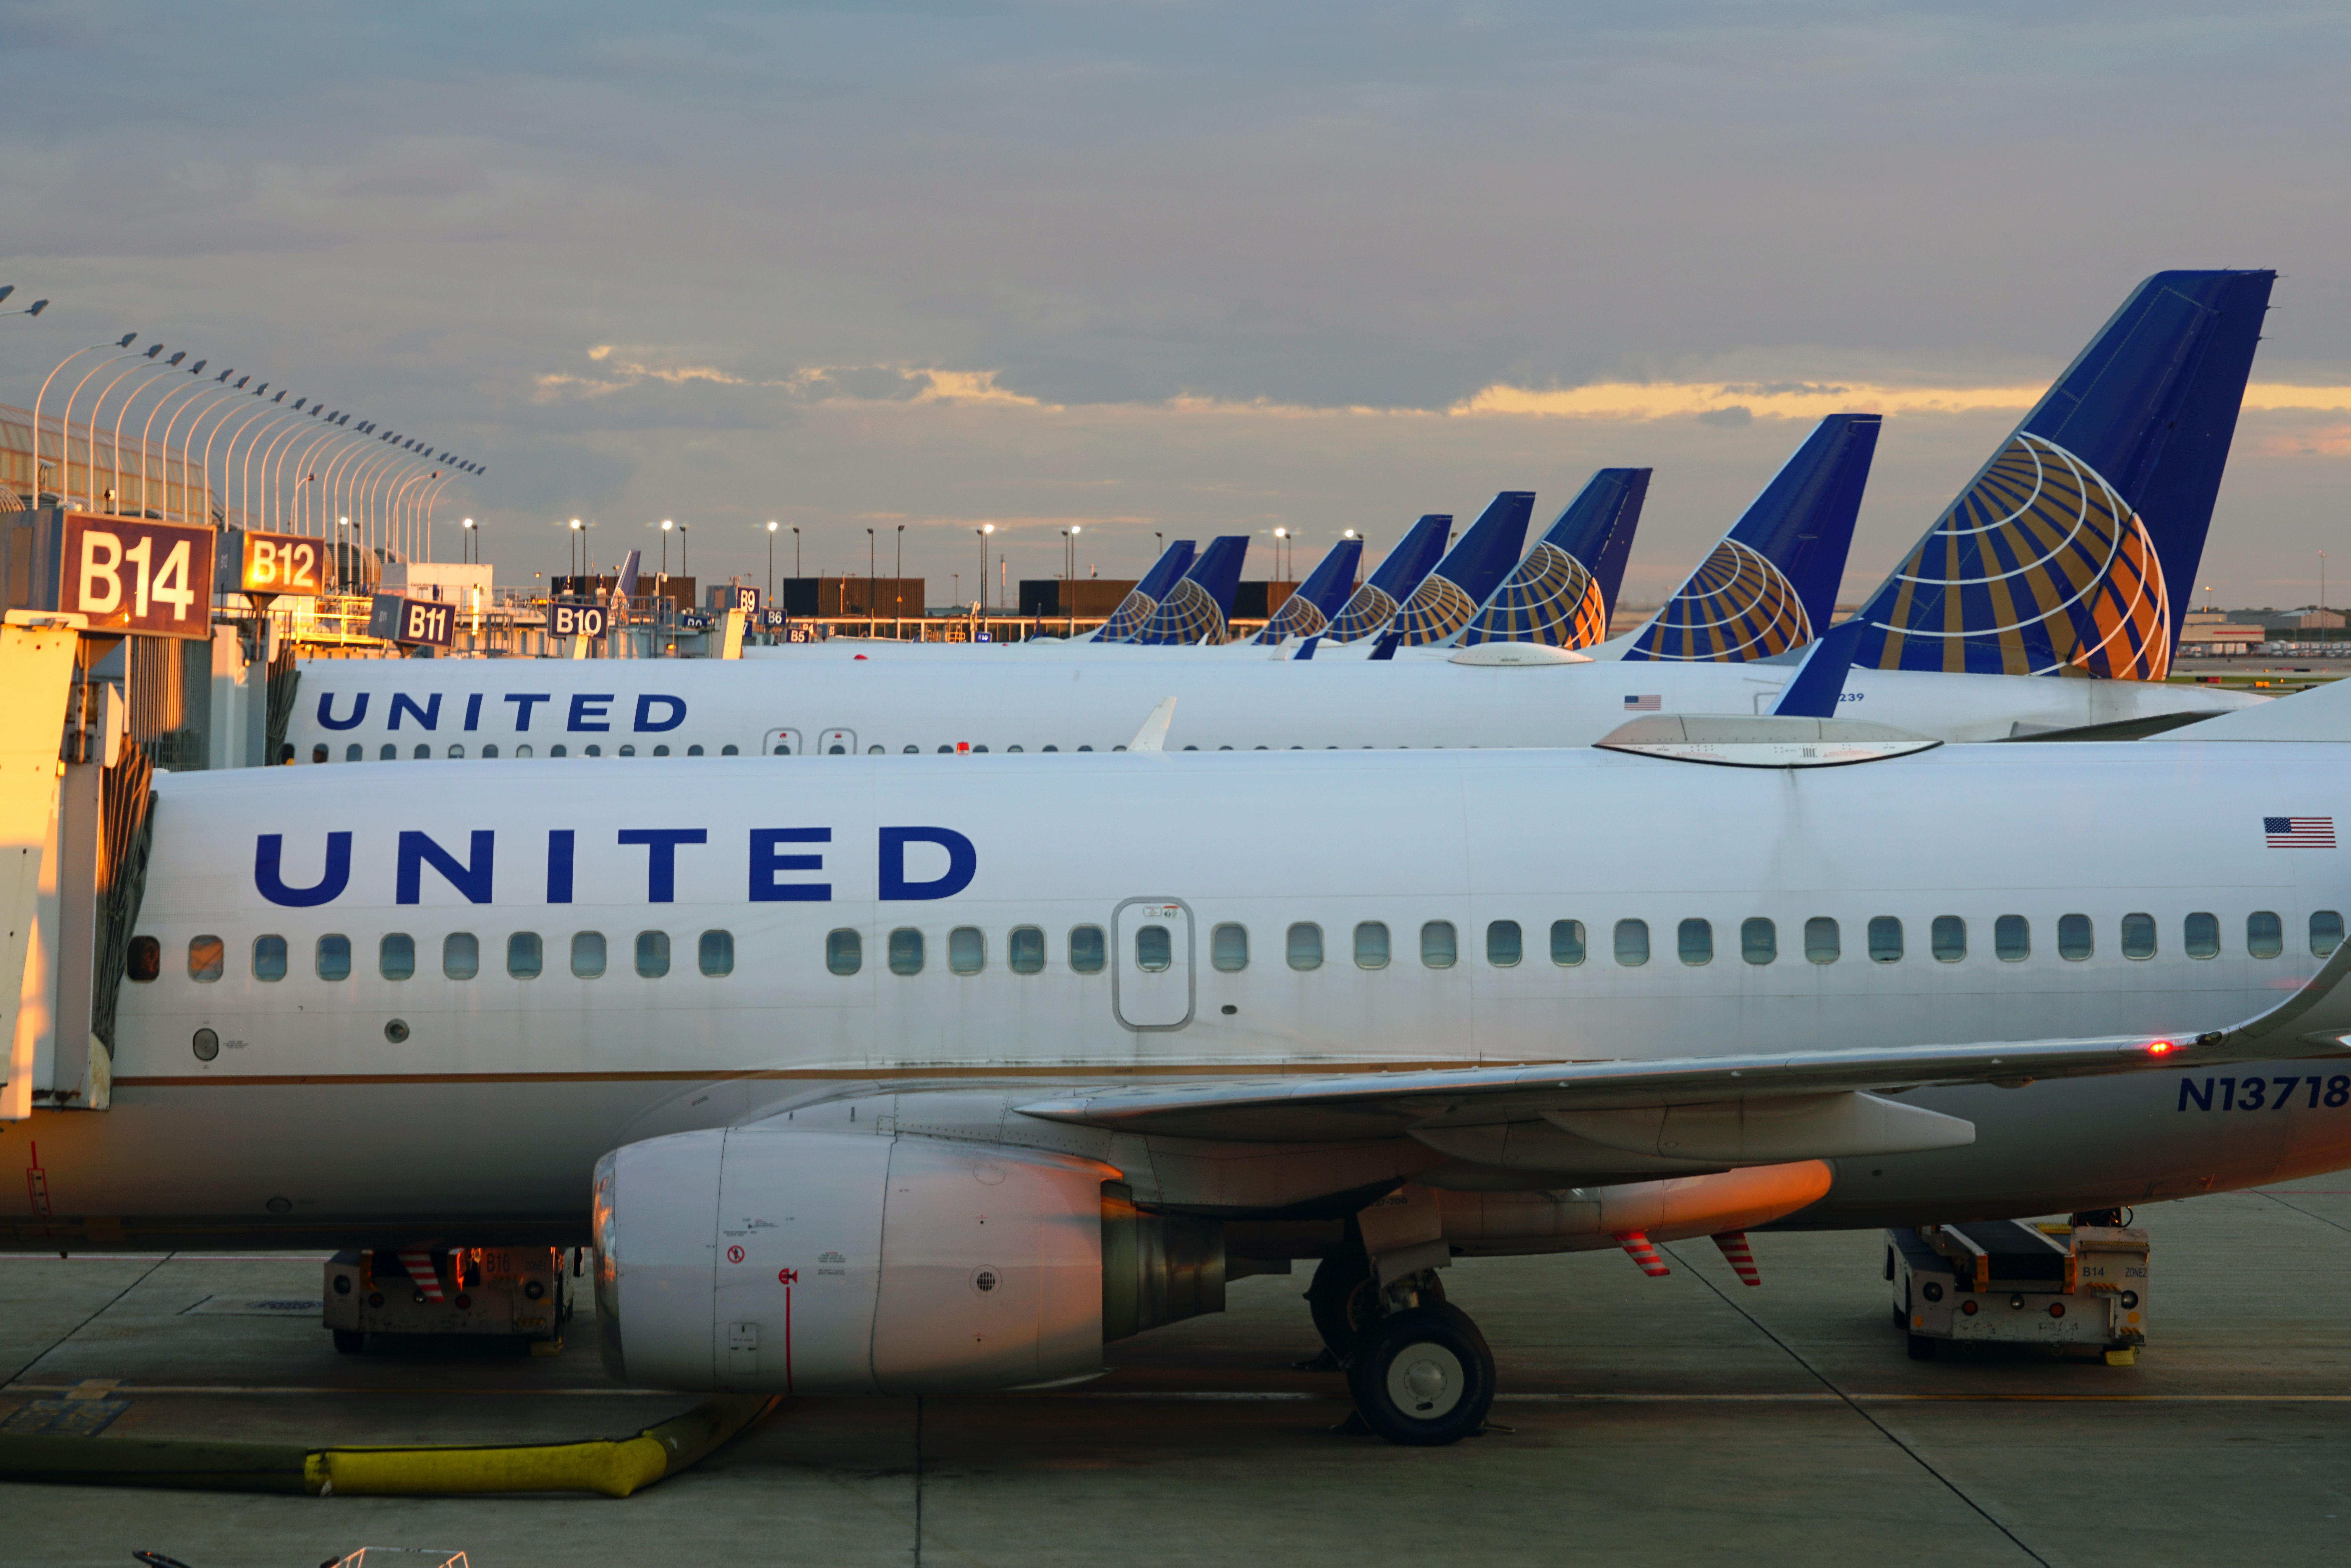 Many United Airlines Aircraft parked side by side.